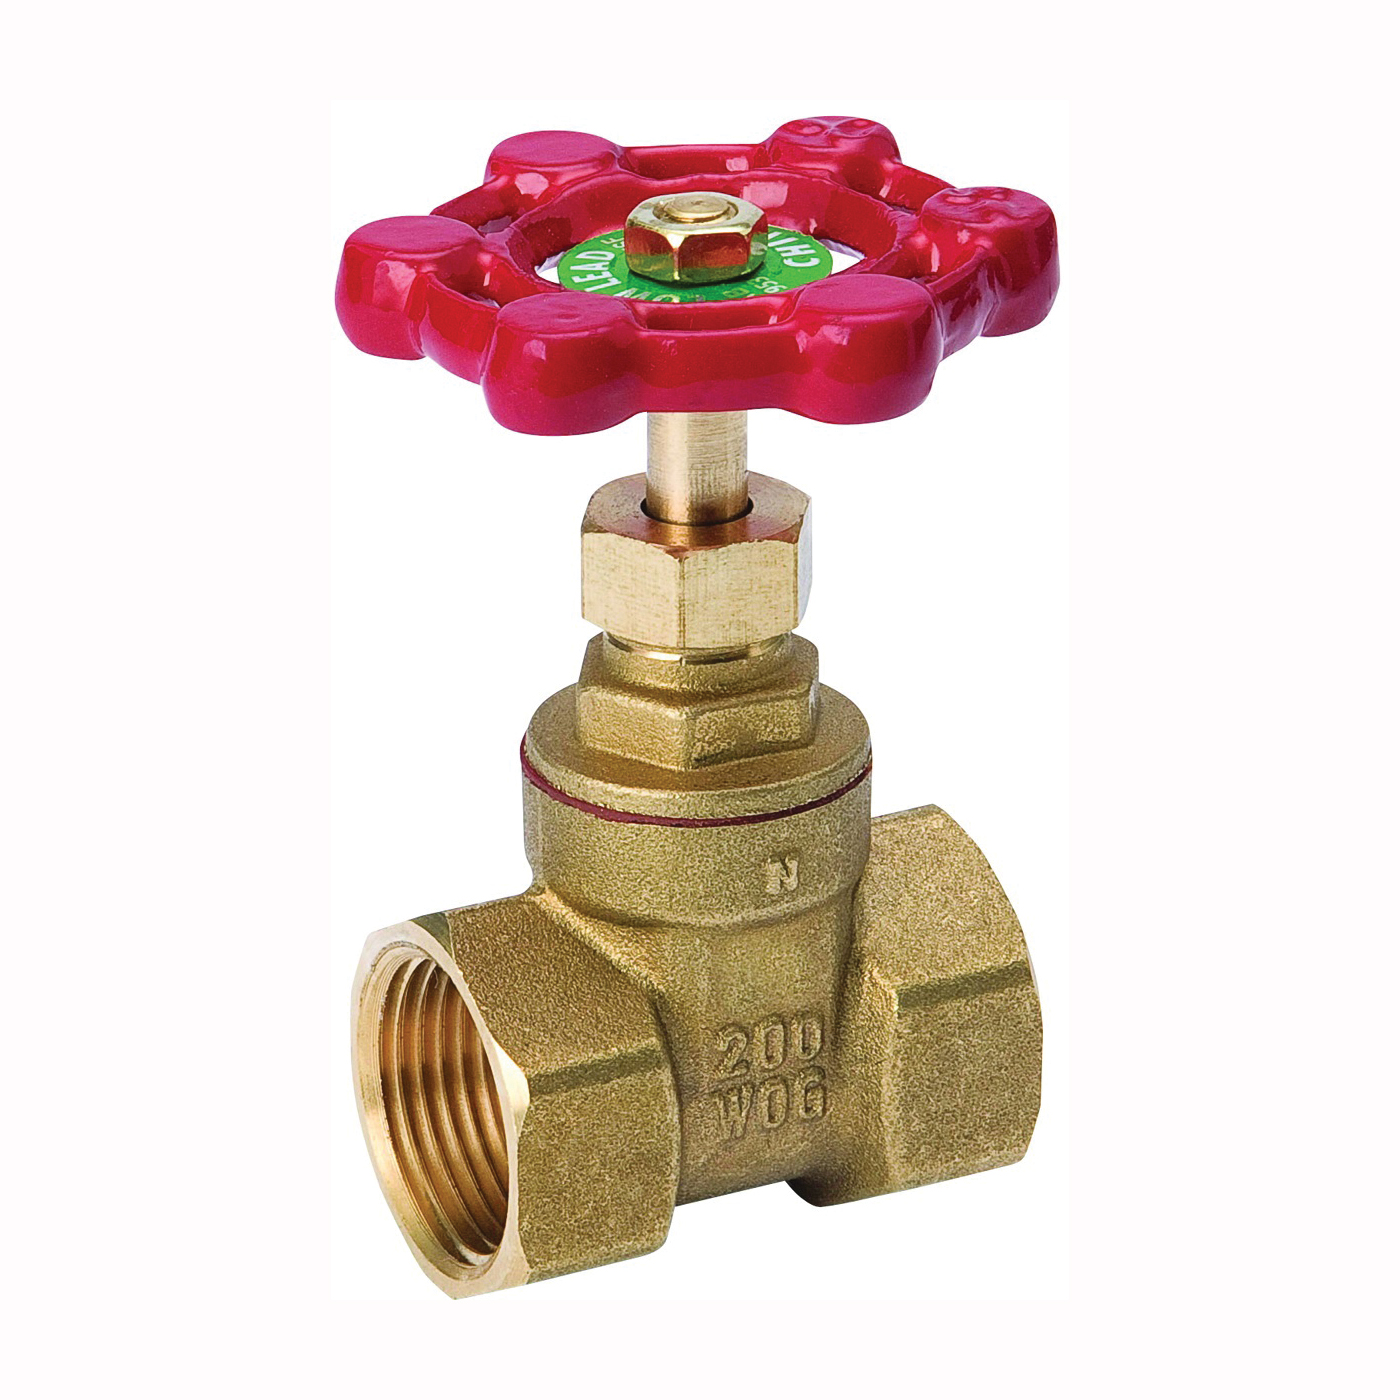 ProLine Series 100-406NL Gate Valve, 1-1/4 in Connection, FPT, 200/125 psi Pressure, Brass Body